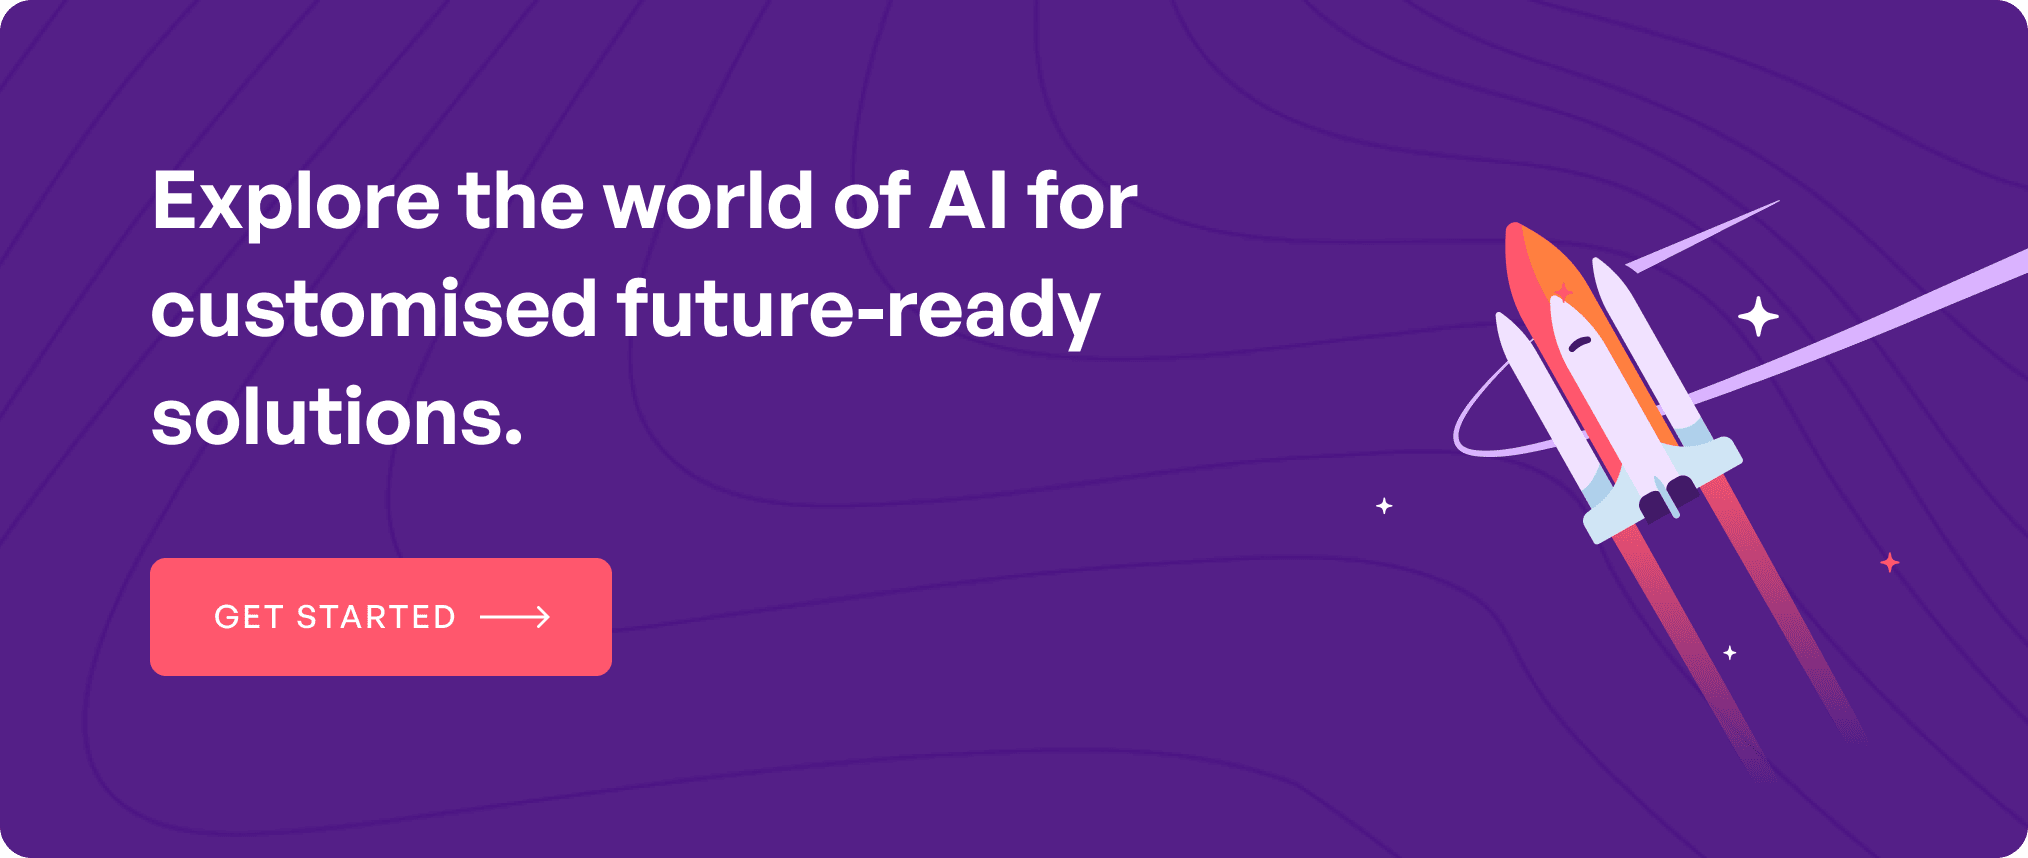 AI solutions